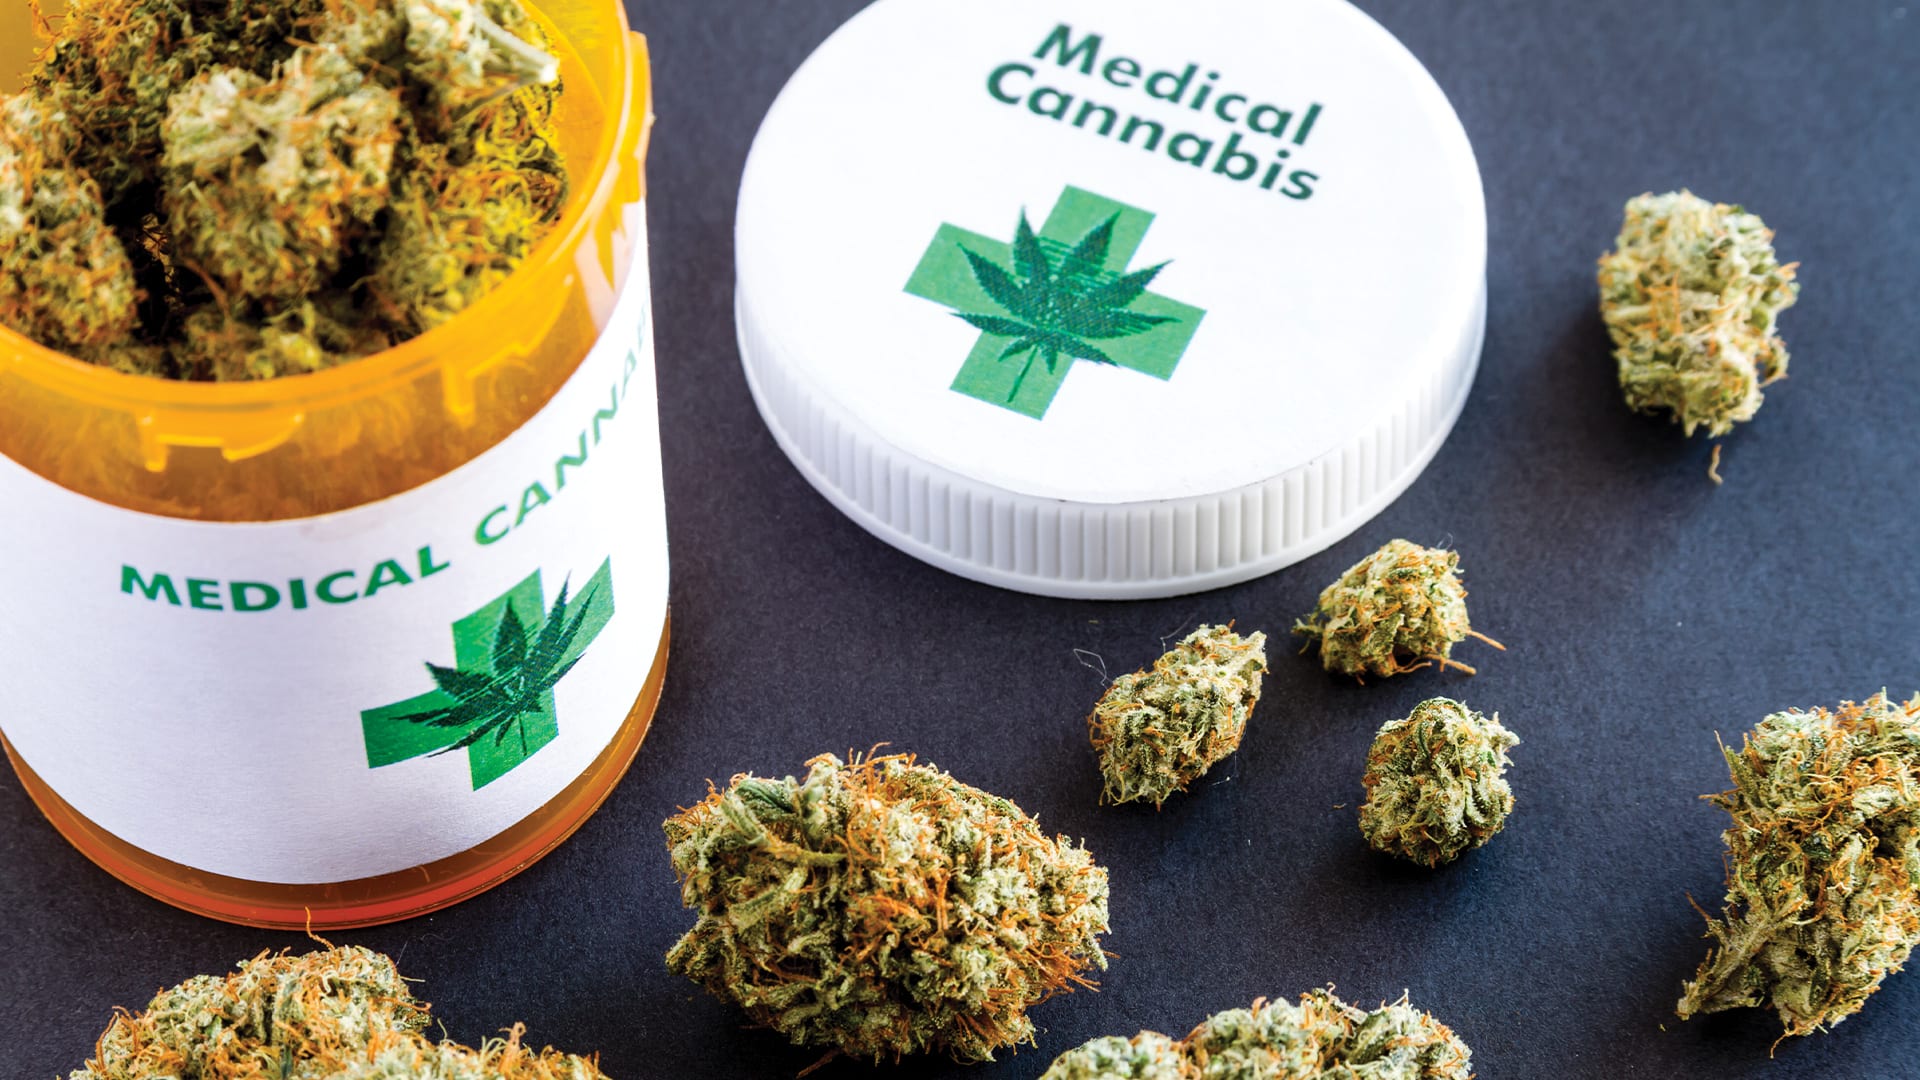 6 Key Features to Distinguish Between Recreational and Medical cannabis